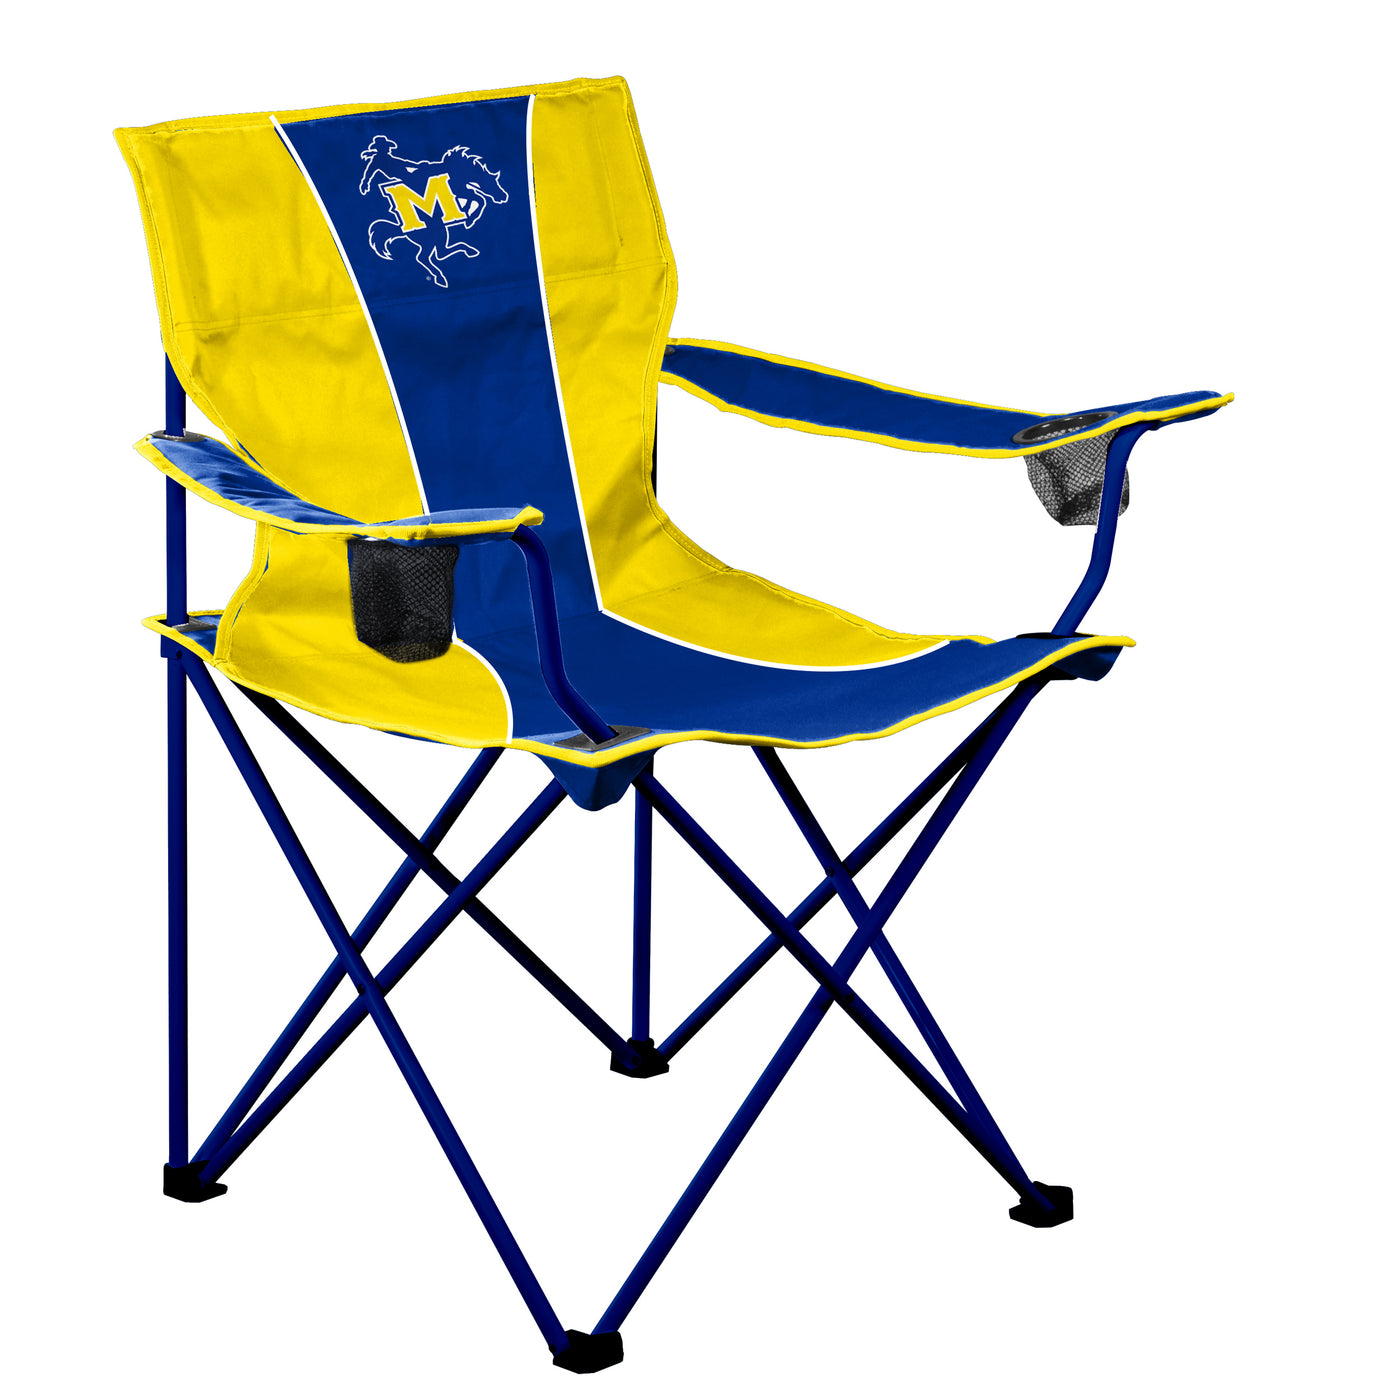 McNeese State Big Boy Chair Colored Frame